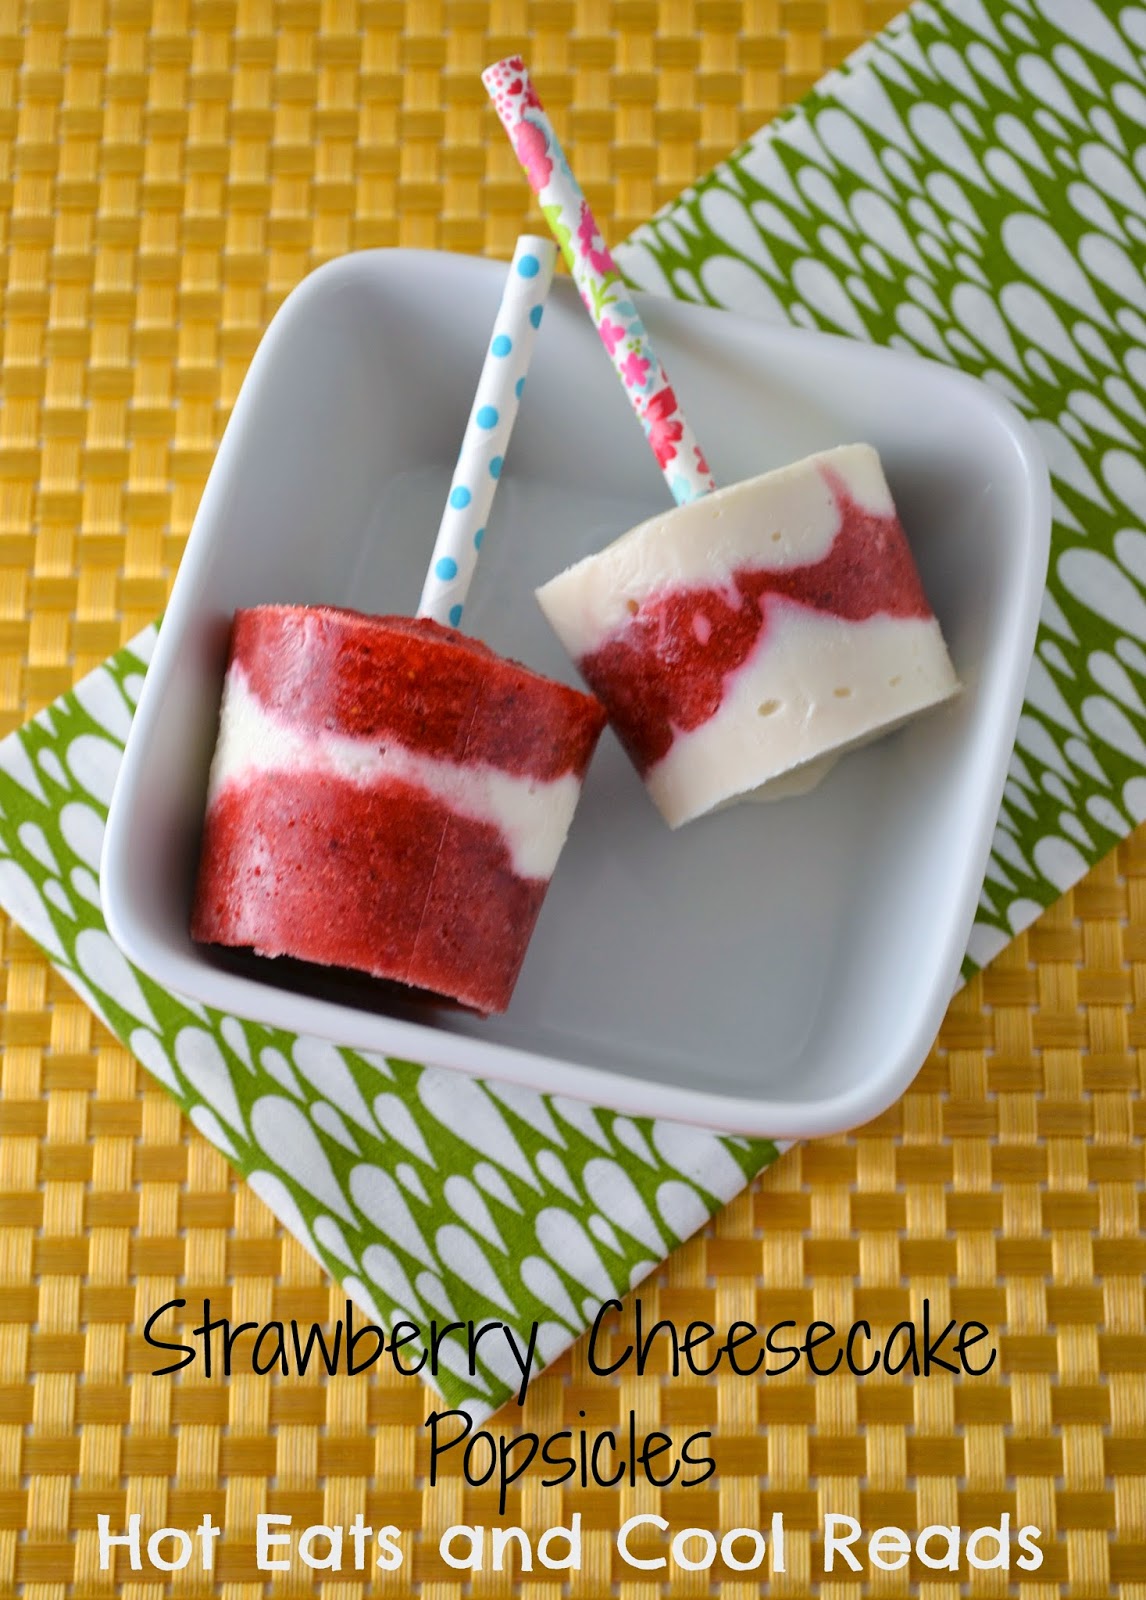 Strawberry Cheesecake Popsicles by Hot Eats and Cool Reads